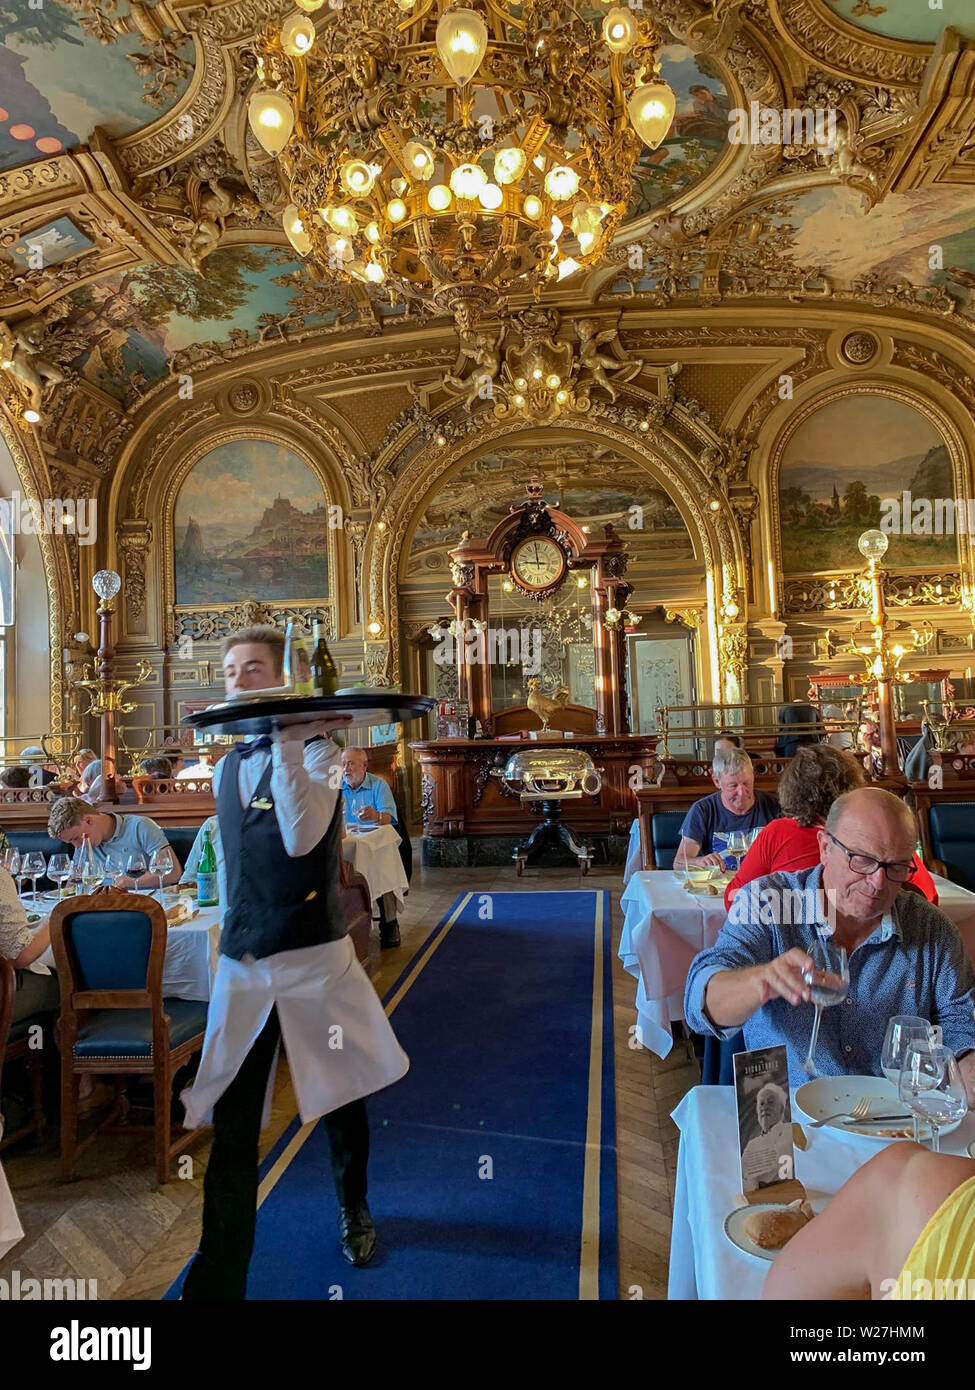 Paris, FRANCE,  People inside Traditional French Brasserie Restaurant interior,  Le Train Bleu, in Gare de Lyon Train Station, Authentic French lifestyle, paris traditional Stock Photo